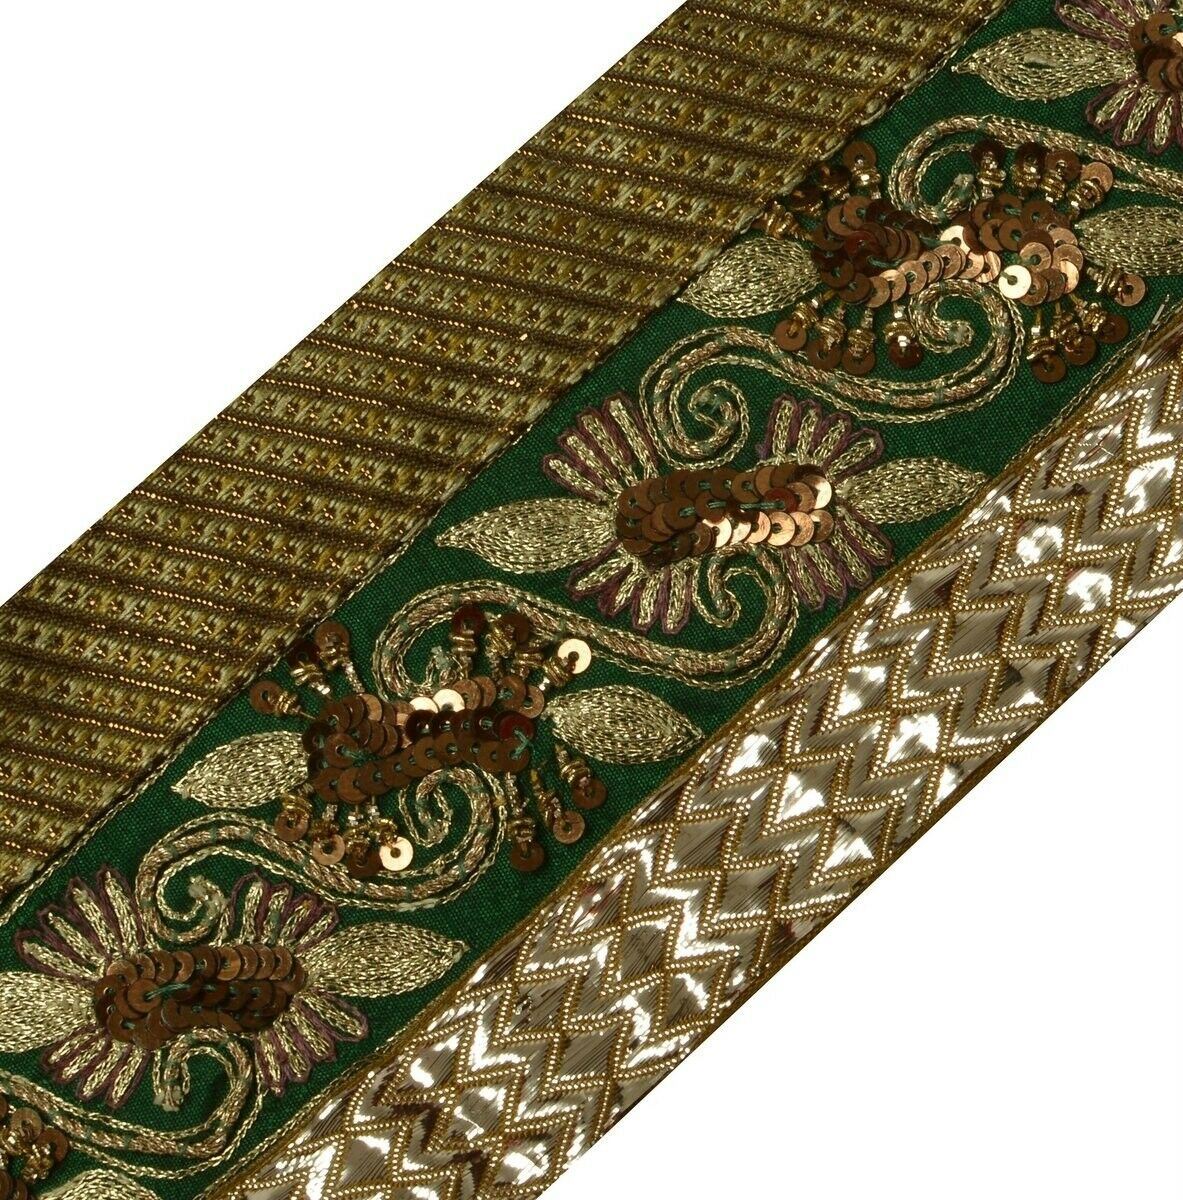 Vintage Sari Border Indian Craft Trim Hand Beaded Embroidered Patch Work Lace